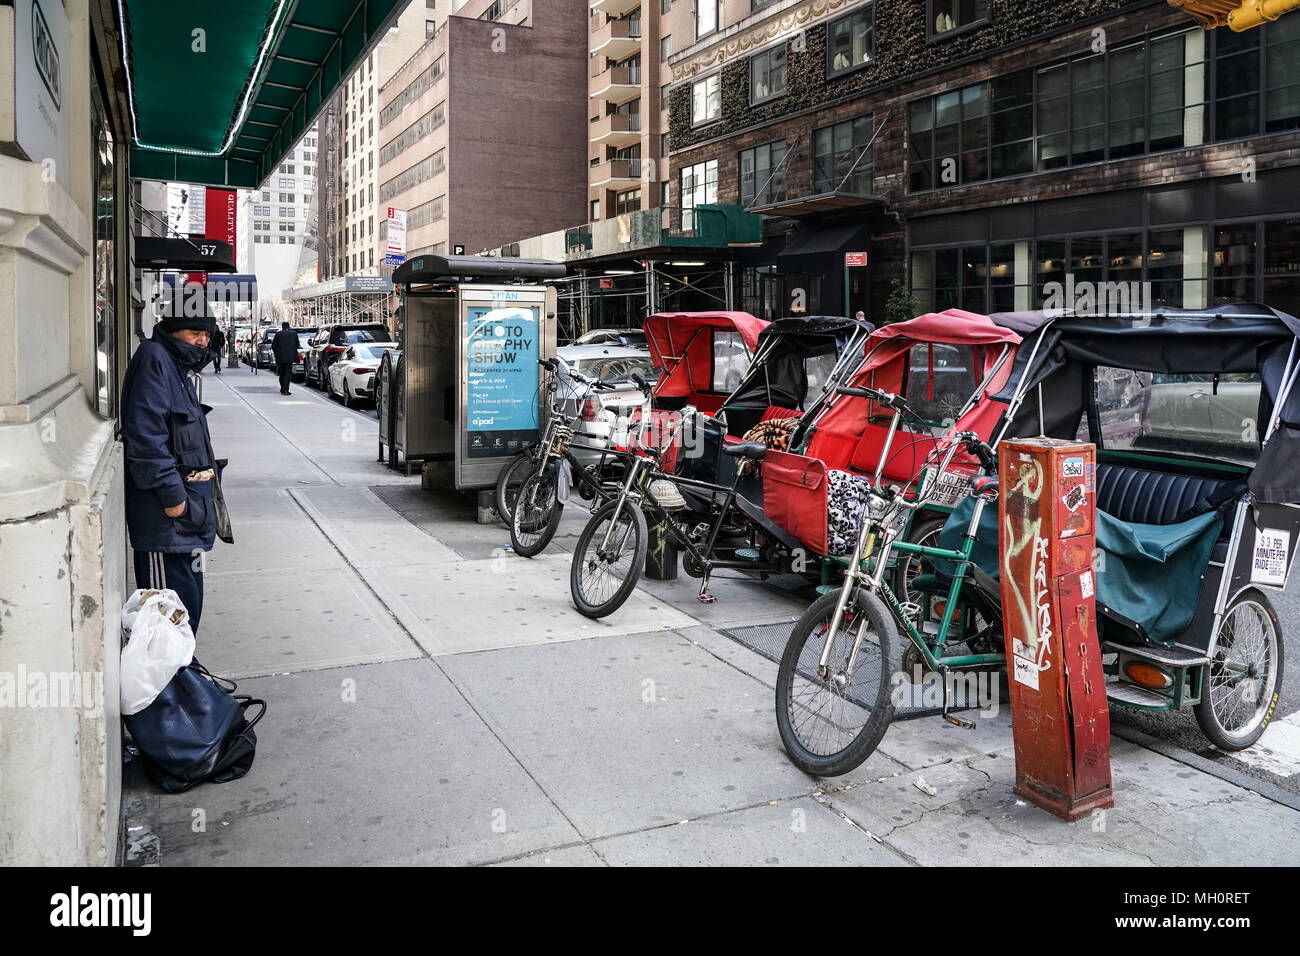 Tuk tuk bikes in New York City in the United States. From a series of travel photos in the United States. Photo date: Sunday, April 8, 2018. Photo: Ro Stock Photo